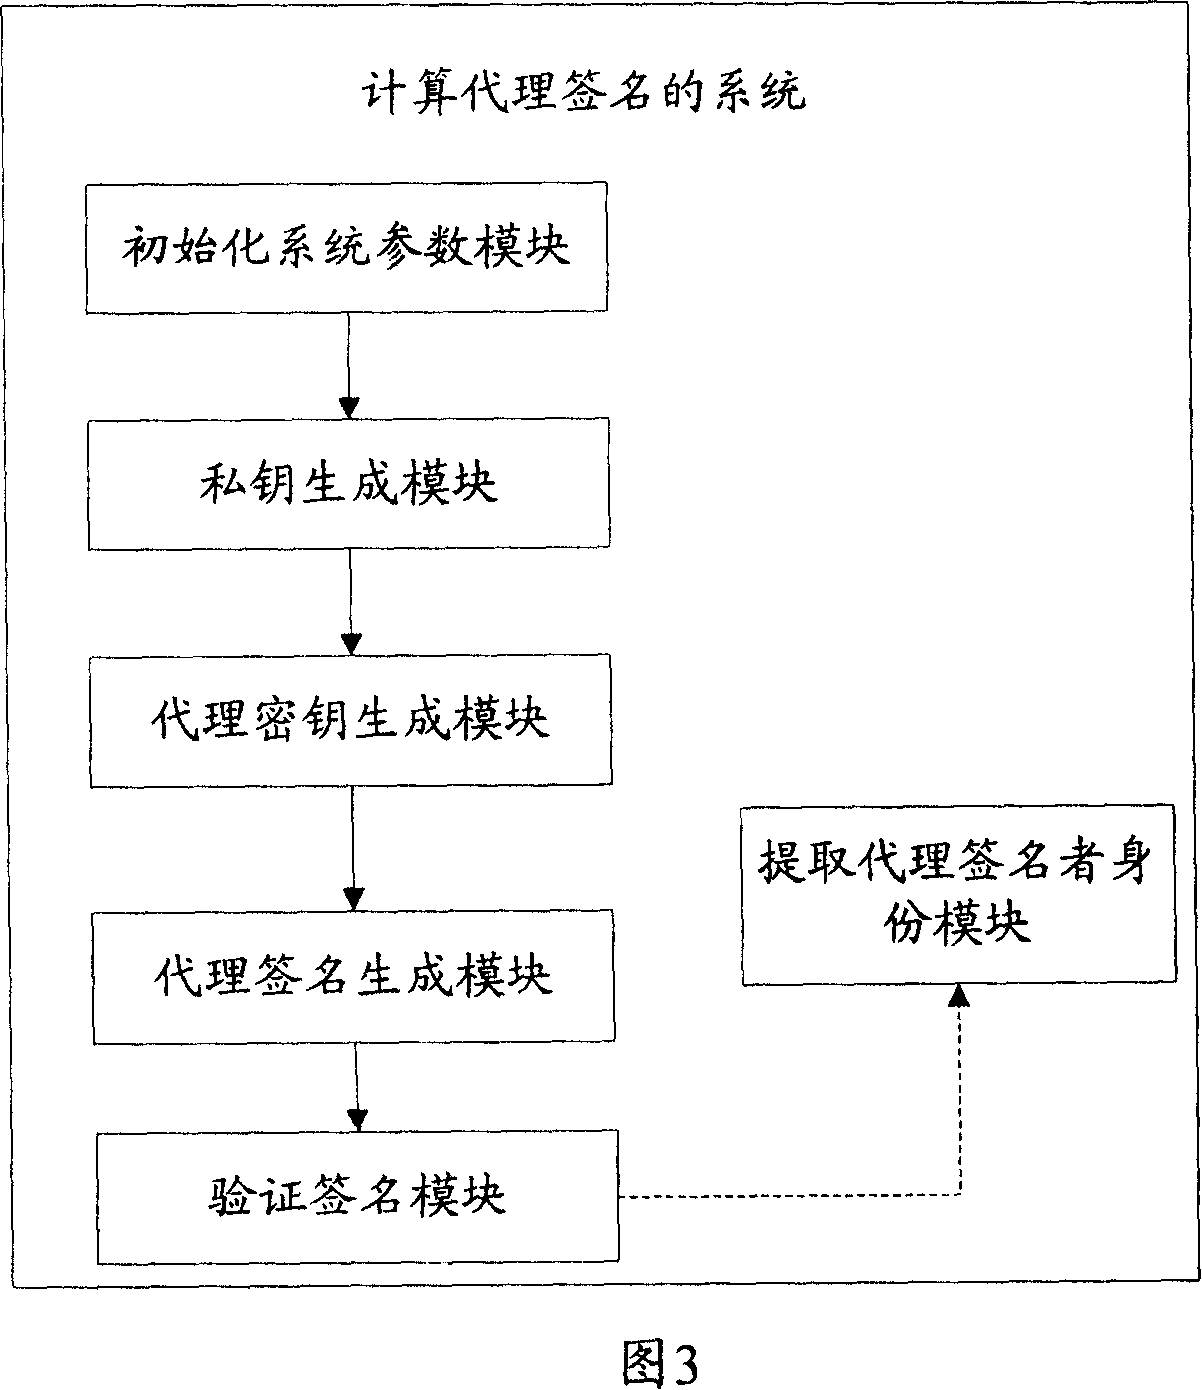 Method and system for agent signature